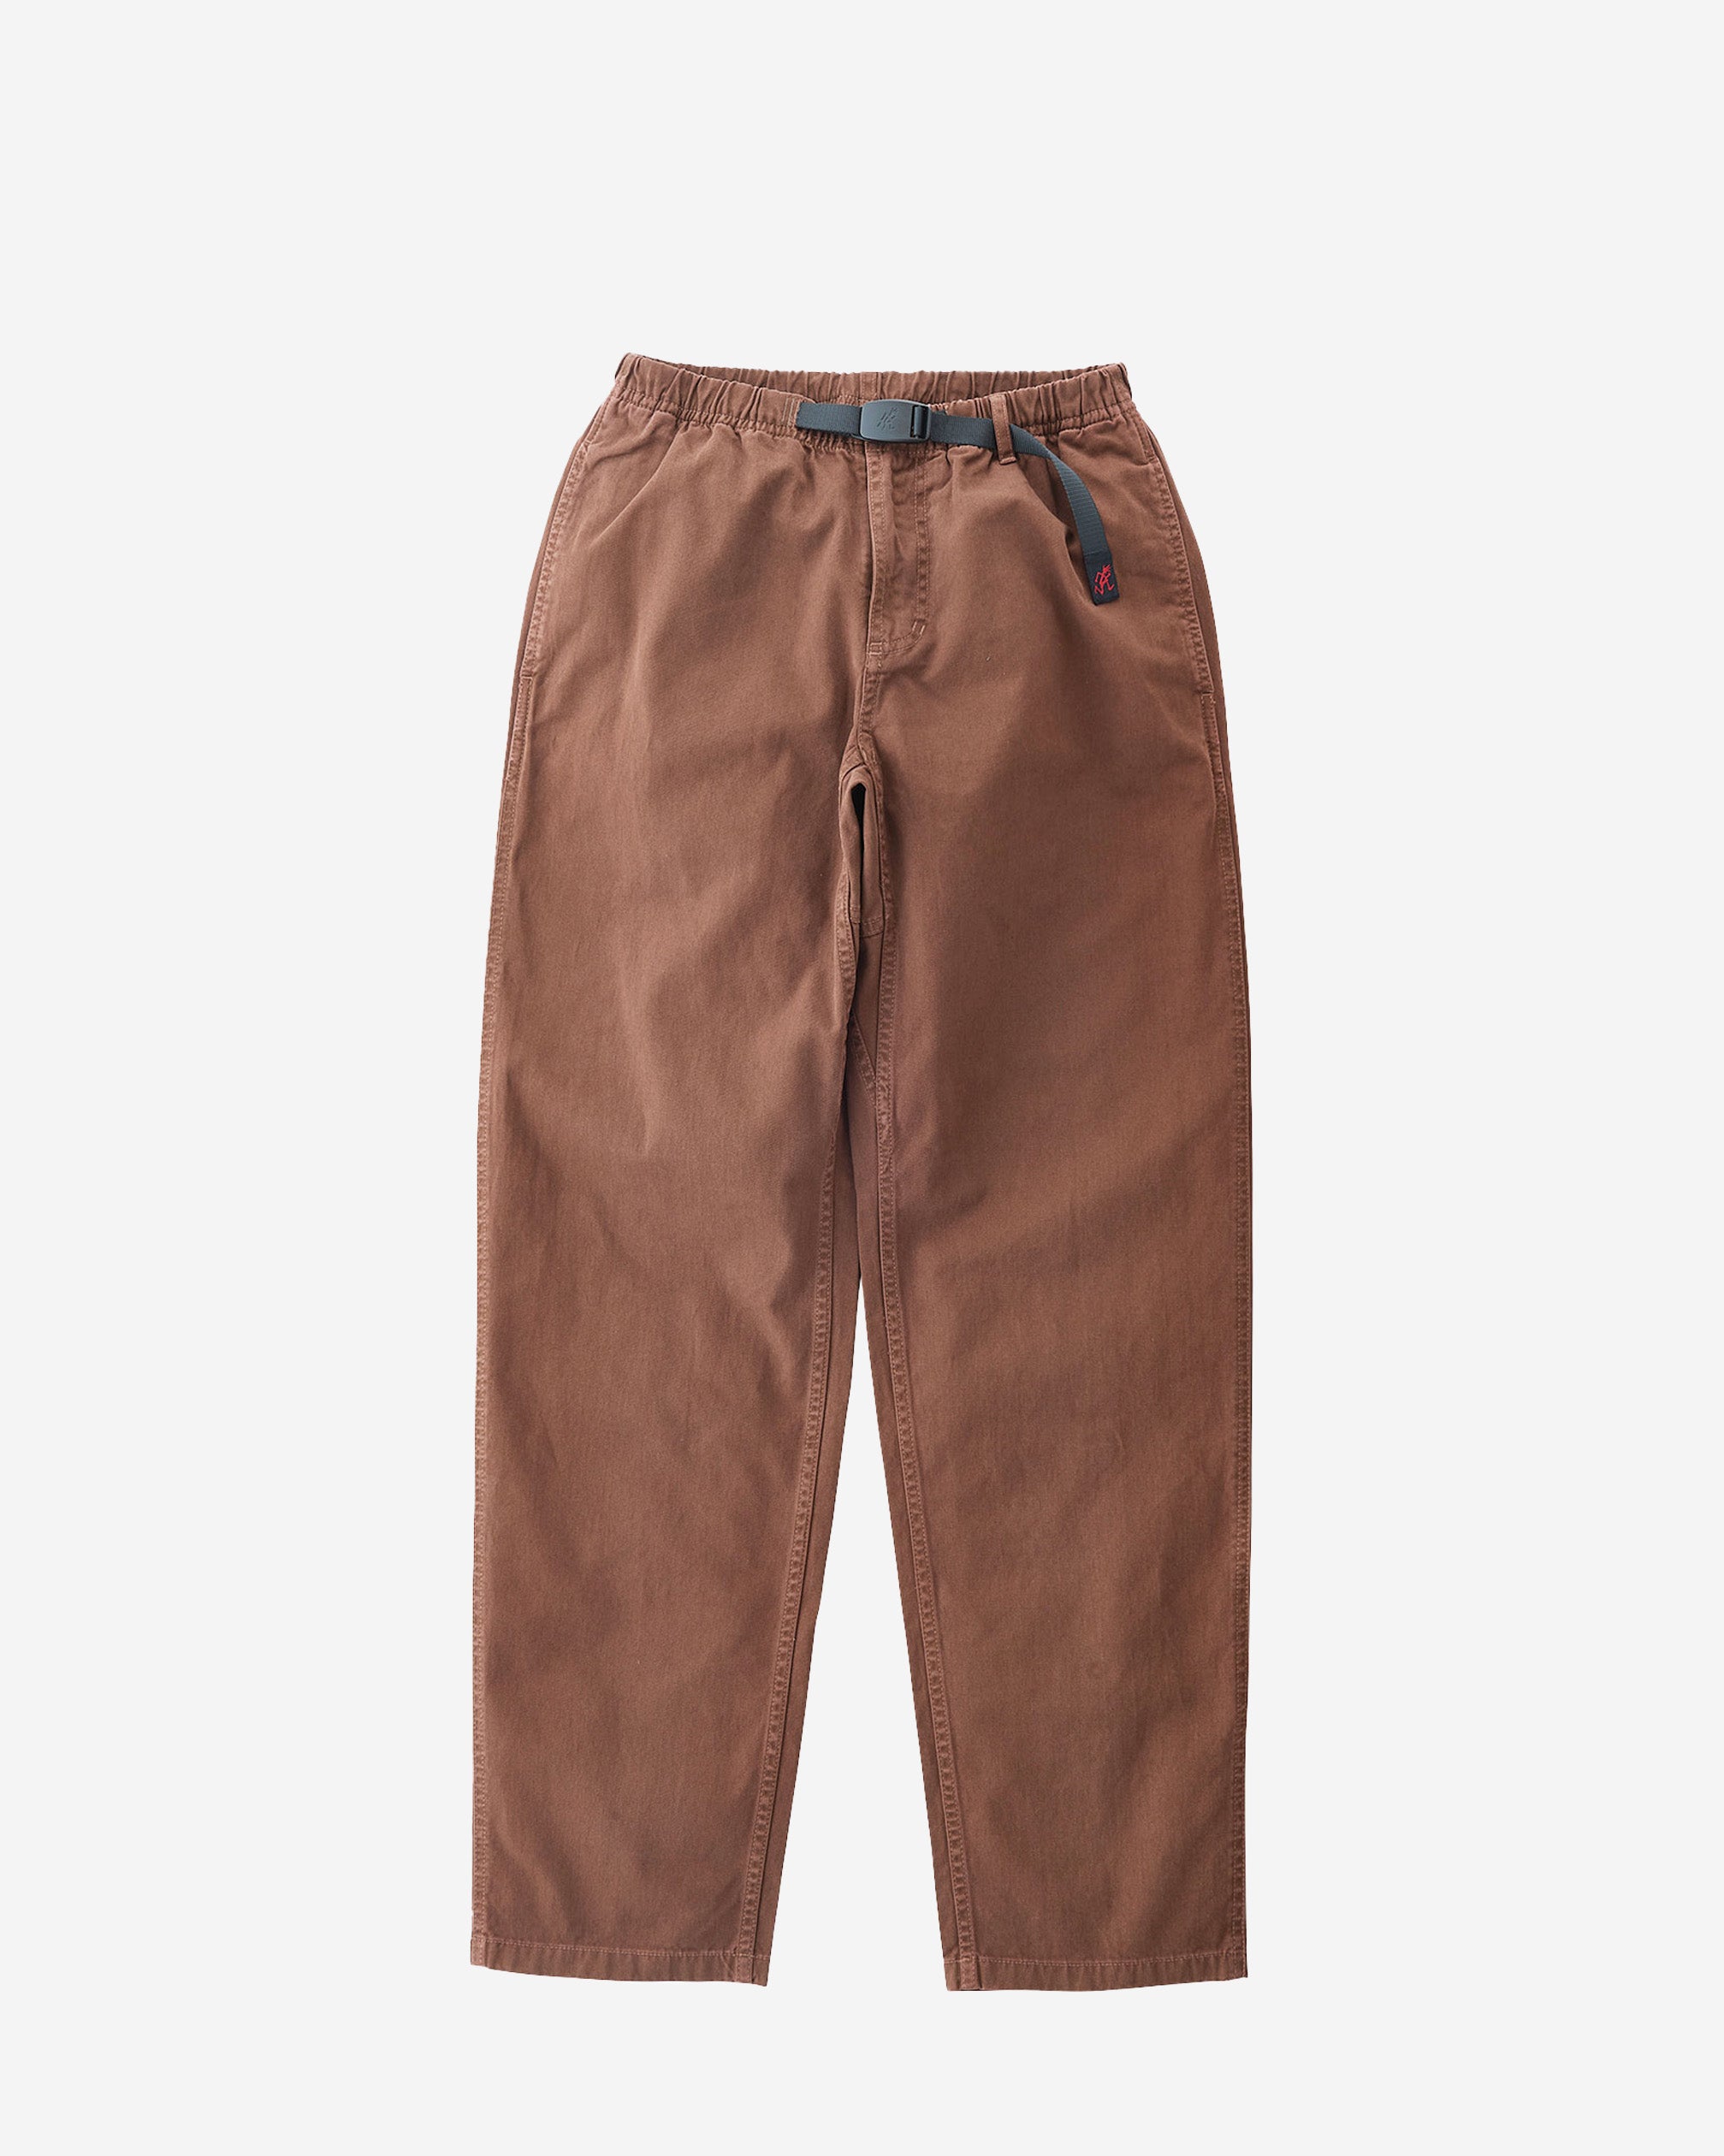 The Original 1982 Gramicci Pants Features gusseted crotch for freedom-of-movement Easy-adjust waistband with integrated belt and buckle Zip fly with two side seam pockets and two back welt pockets Relaxed fit and low rise Inseam 32" Made with 100% Organic Cotton Twill